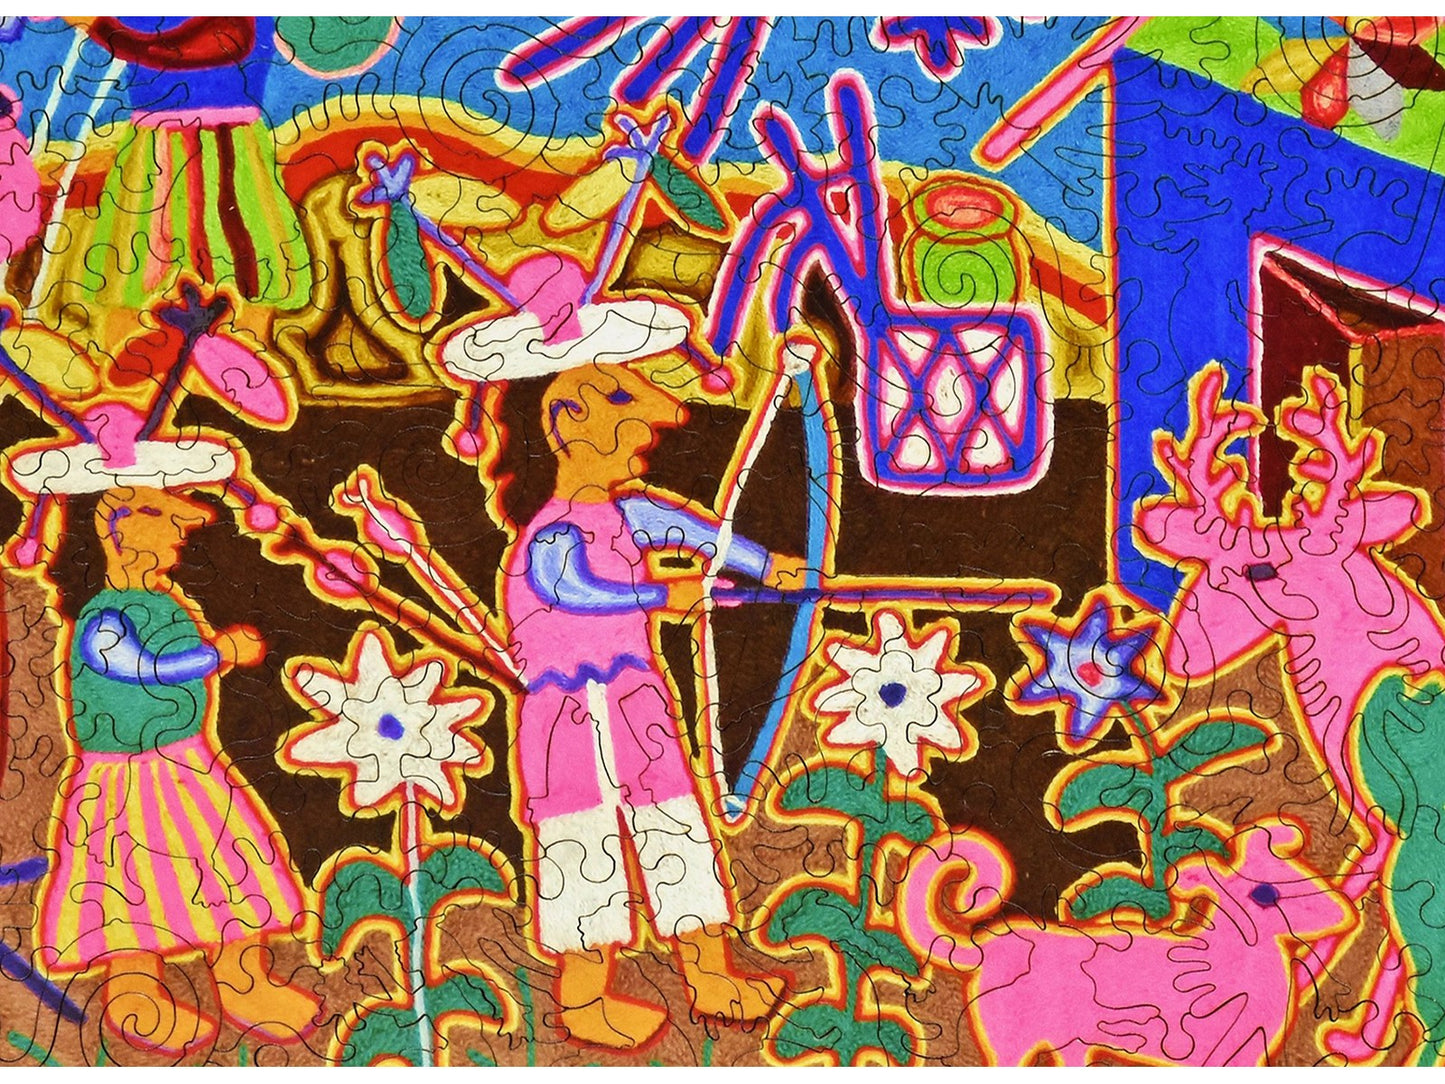 A closeup of the front of the puzzle, Huichol Culture, showing the detail in the pieces.